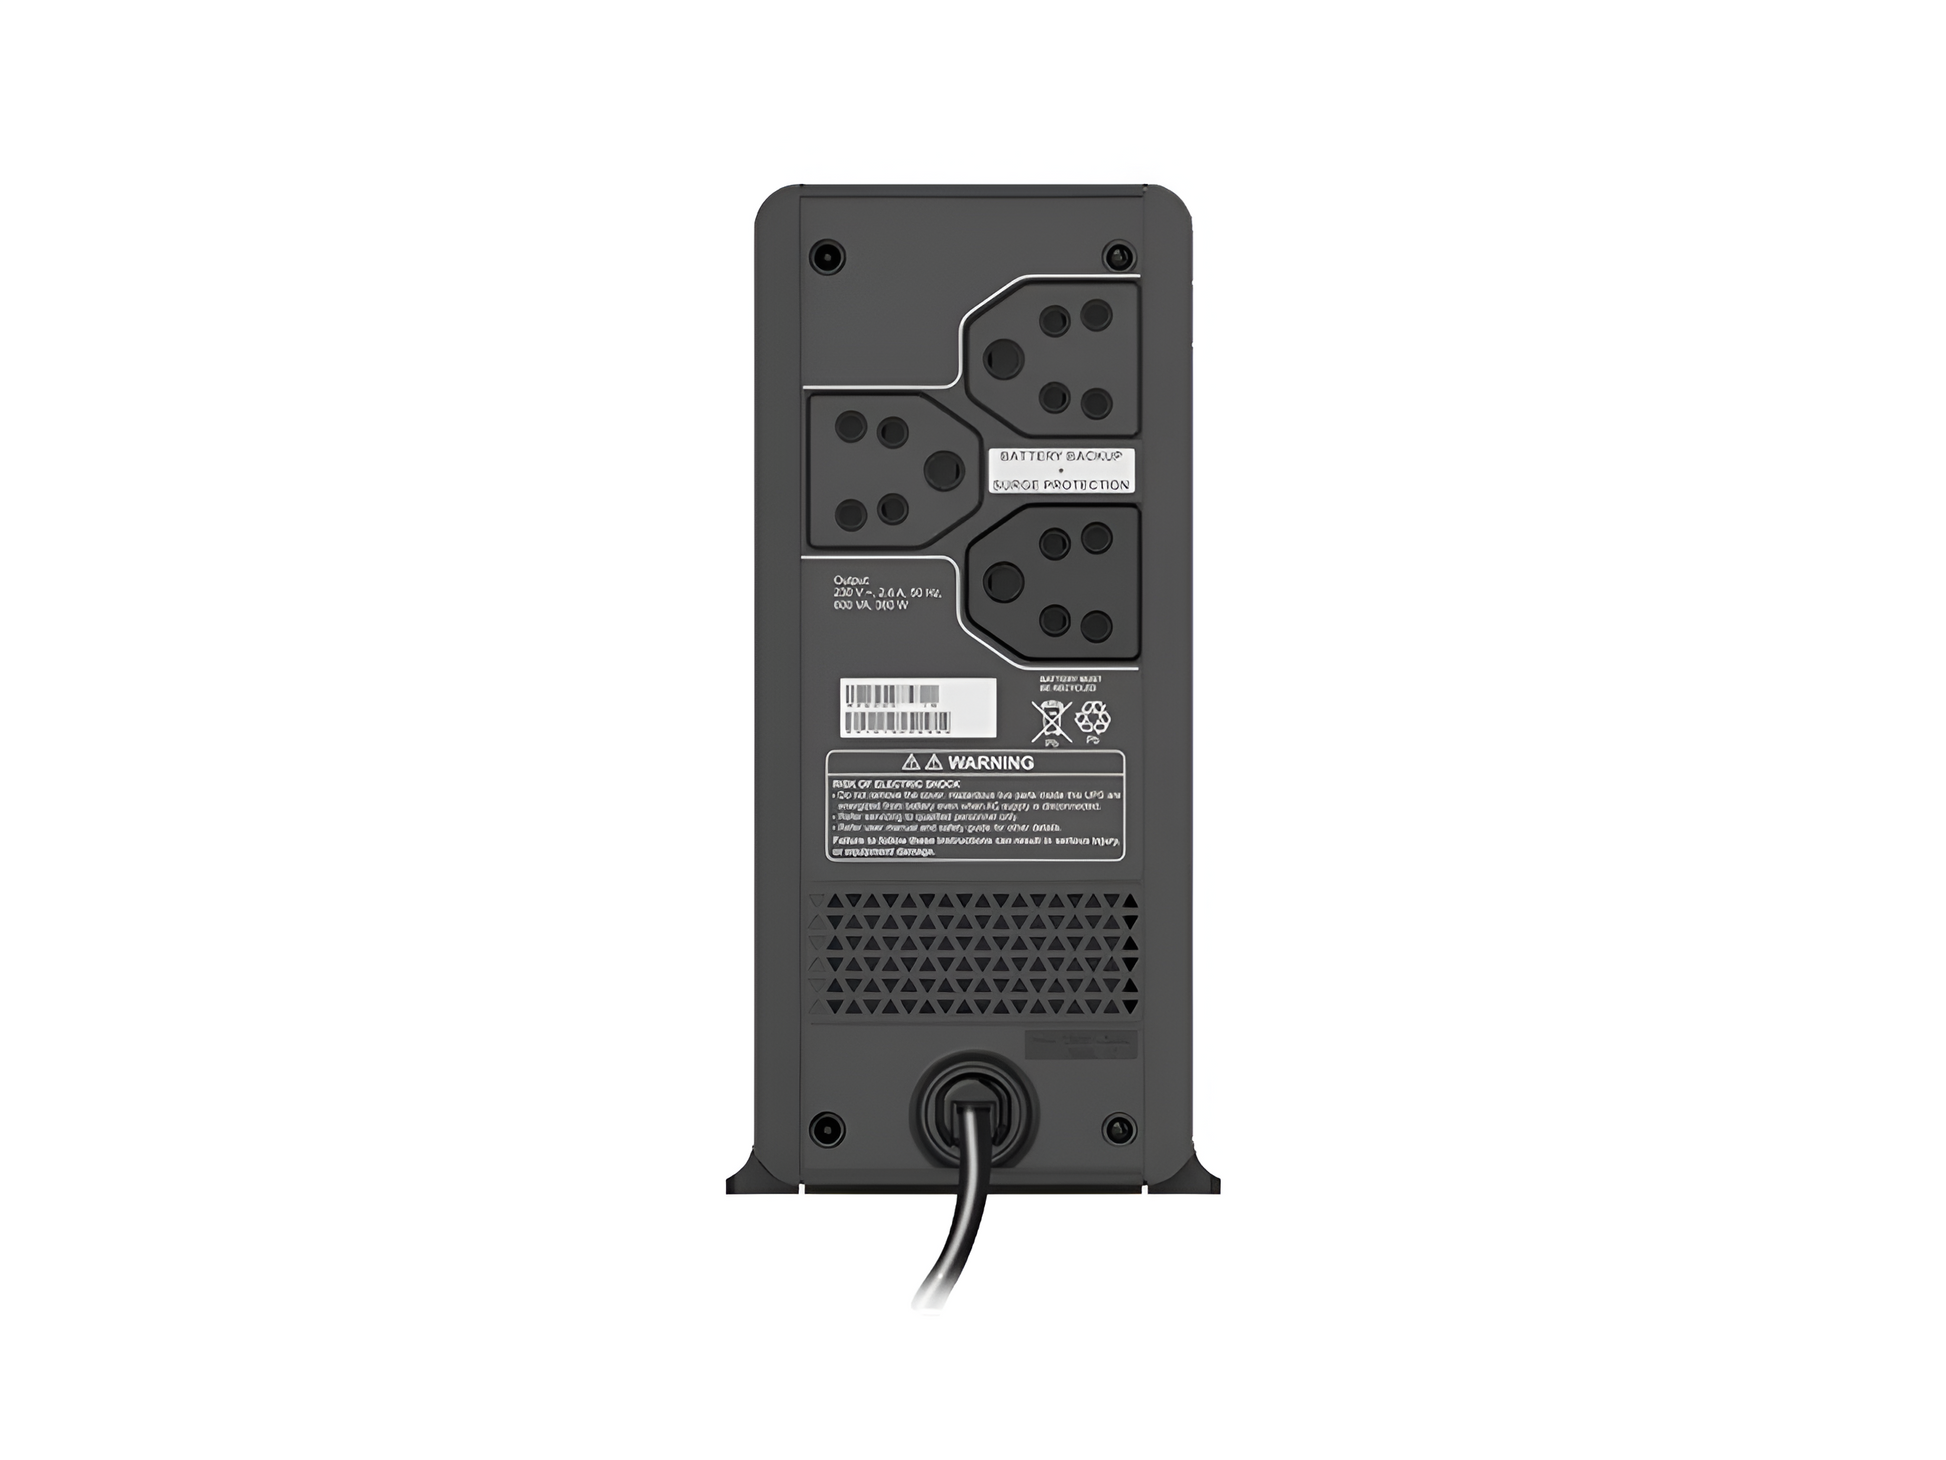 APC BX600C-IN 600VA UPS: Protect Your Devices from Power Outages and Surges-UPS-APC-computerspace